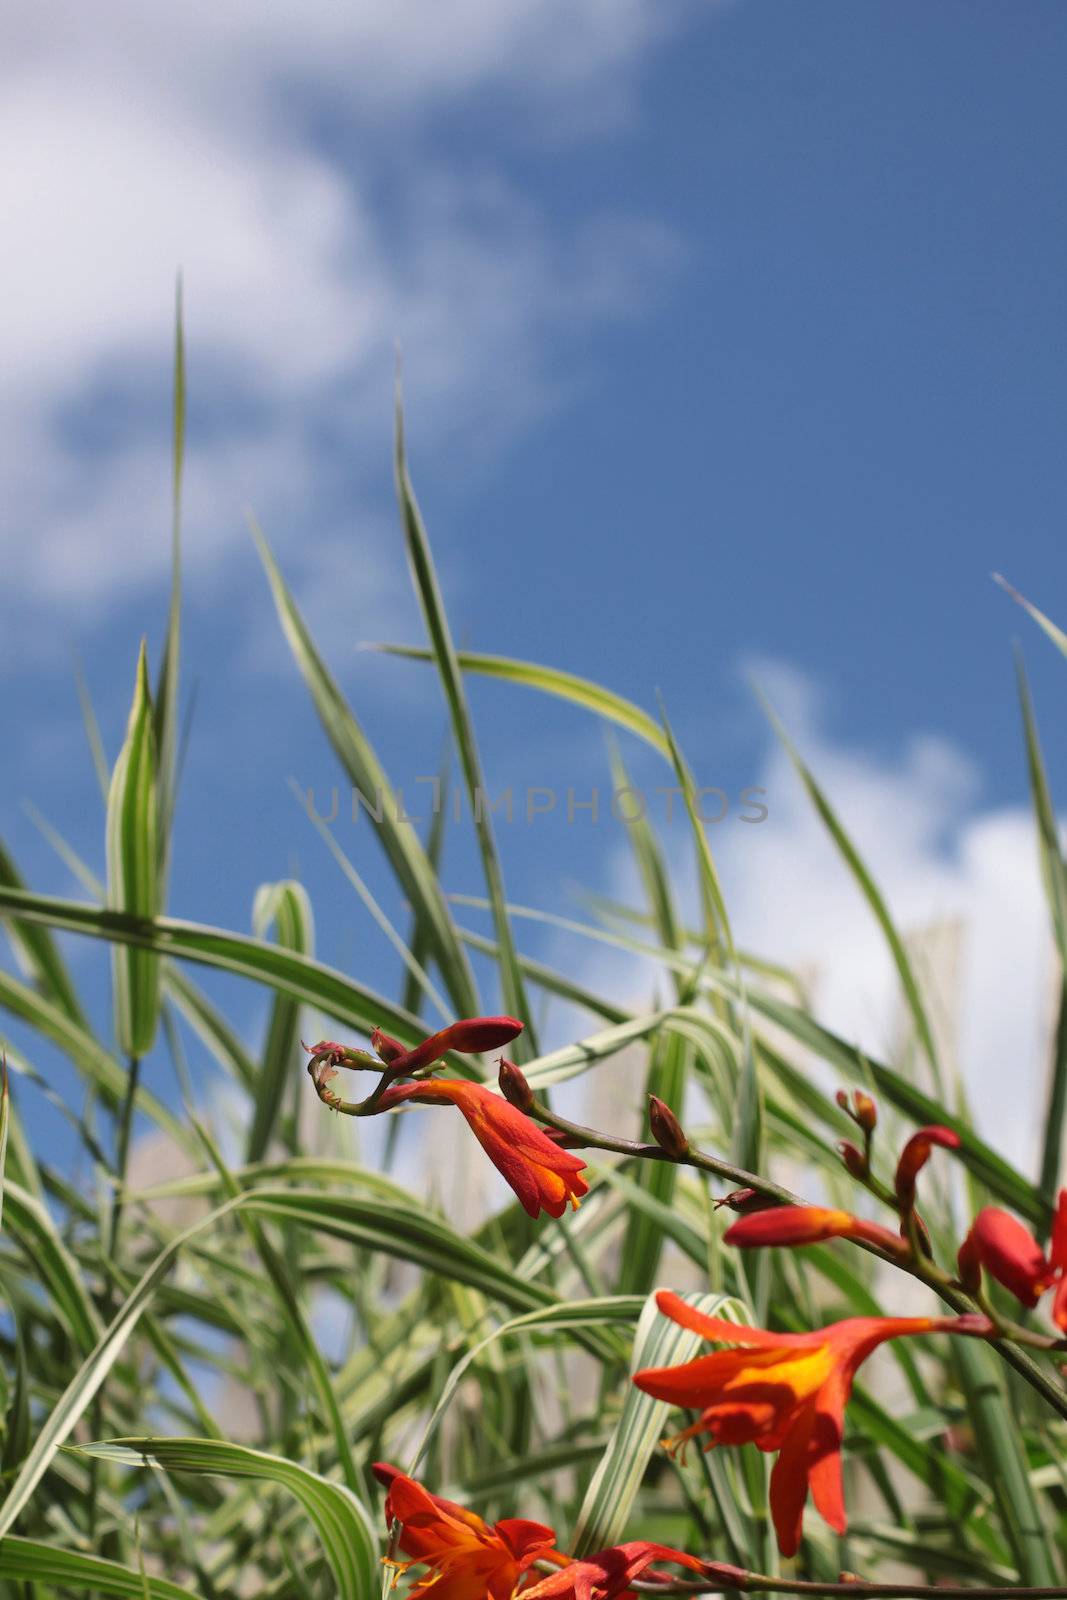 Crocosmia, a small orange flowering plant in the iris family, Iridaceae, a deciduous perennial plant growing in front of some ornamental grasses. Set on a portrait format against a blue sky background with white clouds.